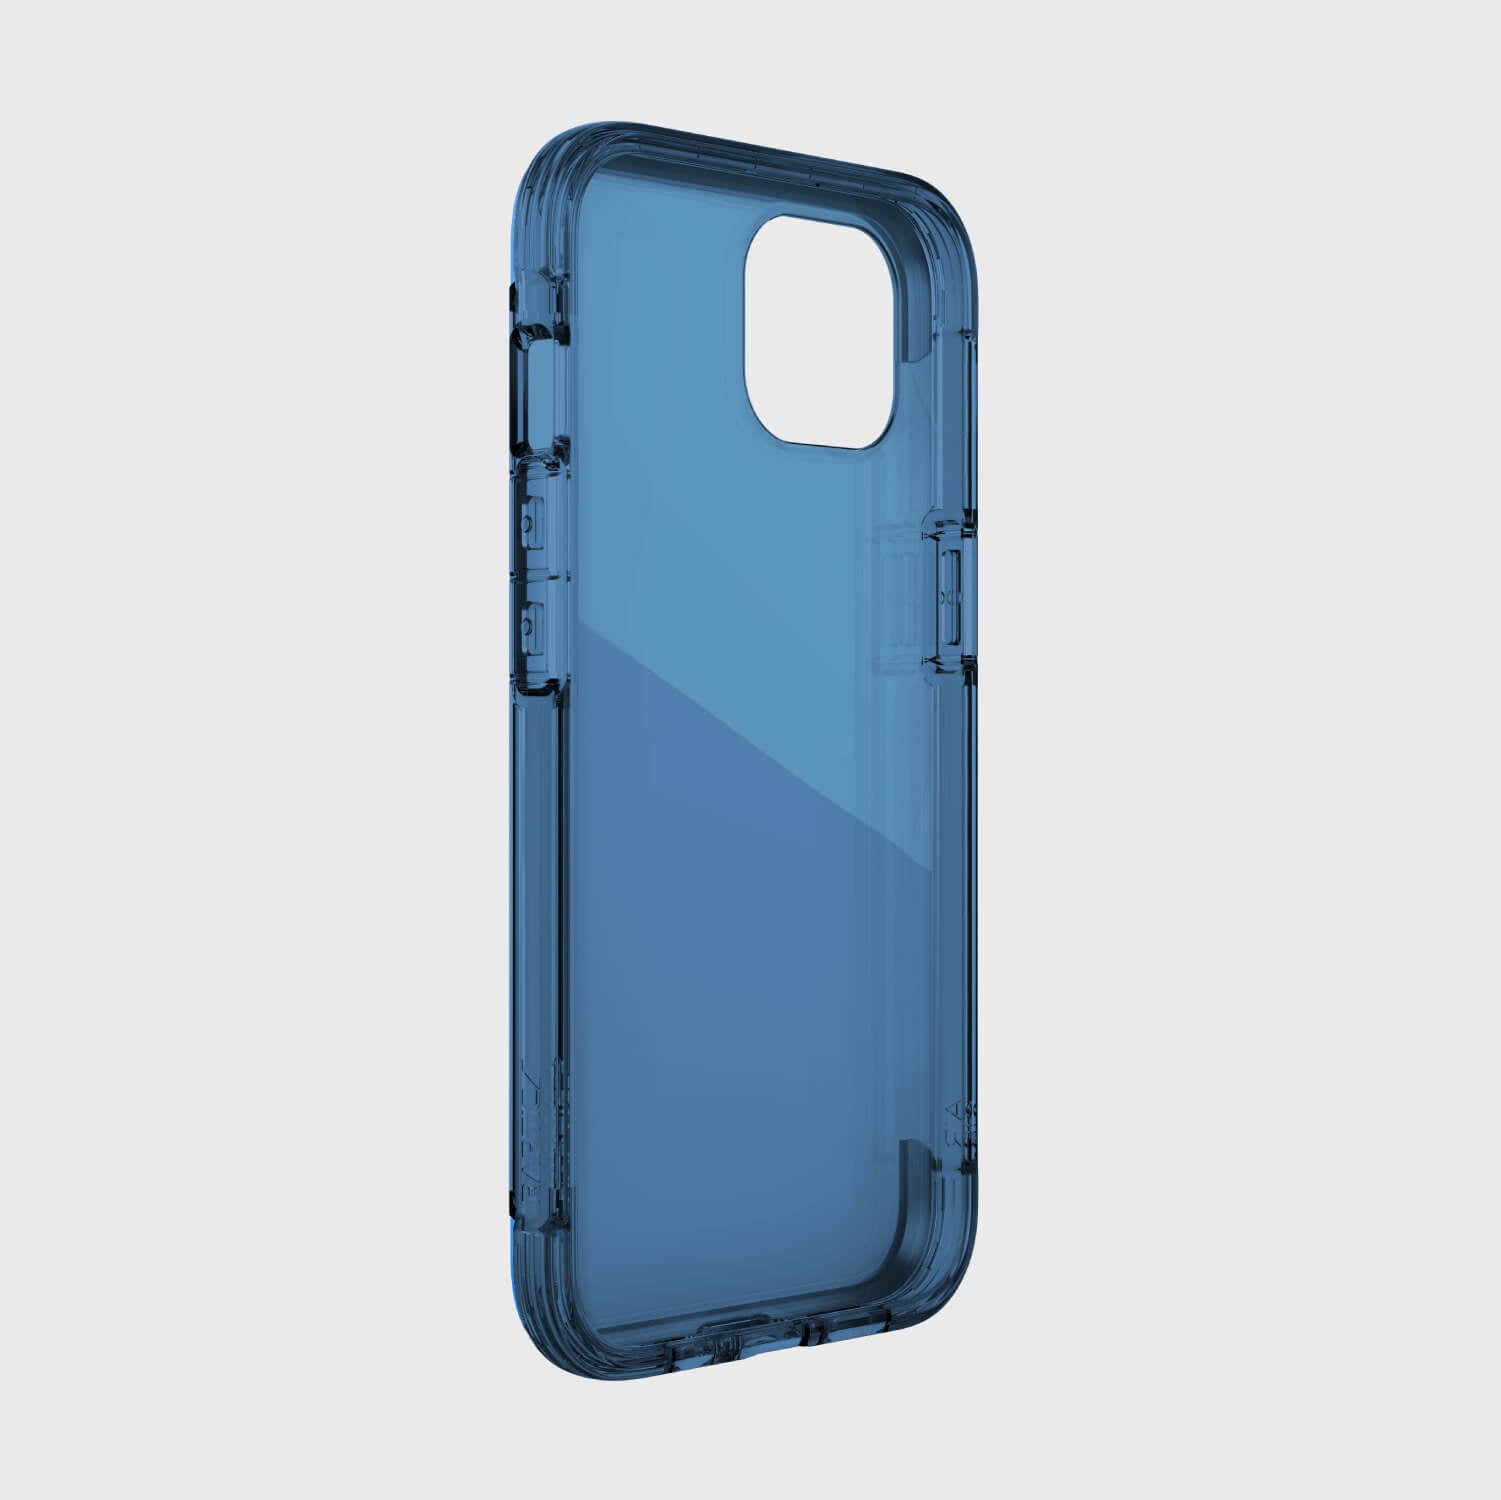 Raptic iPhone 13 Case - AIR in blue offers 13-foot drop protection and is wireless charging compatible.